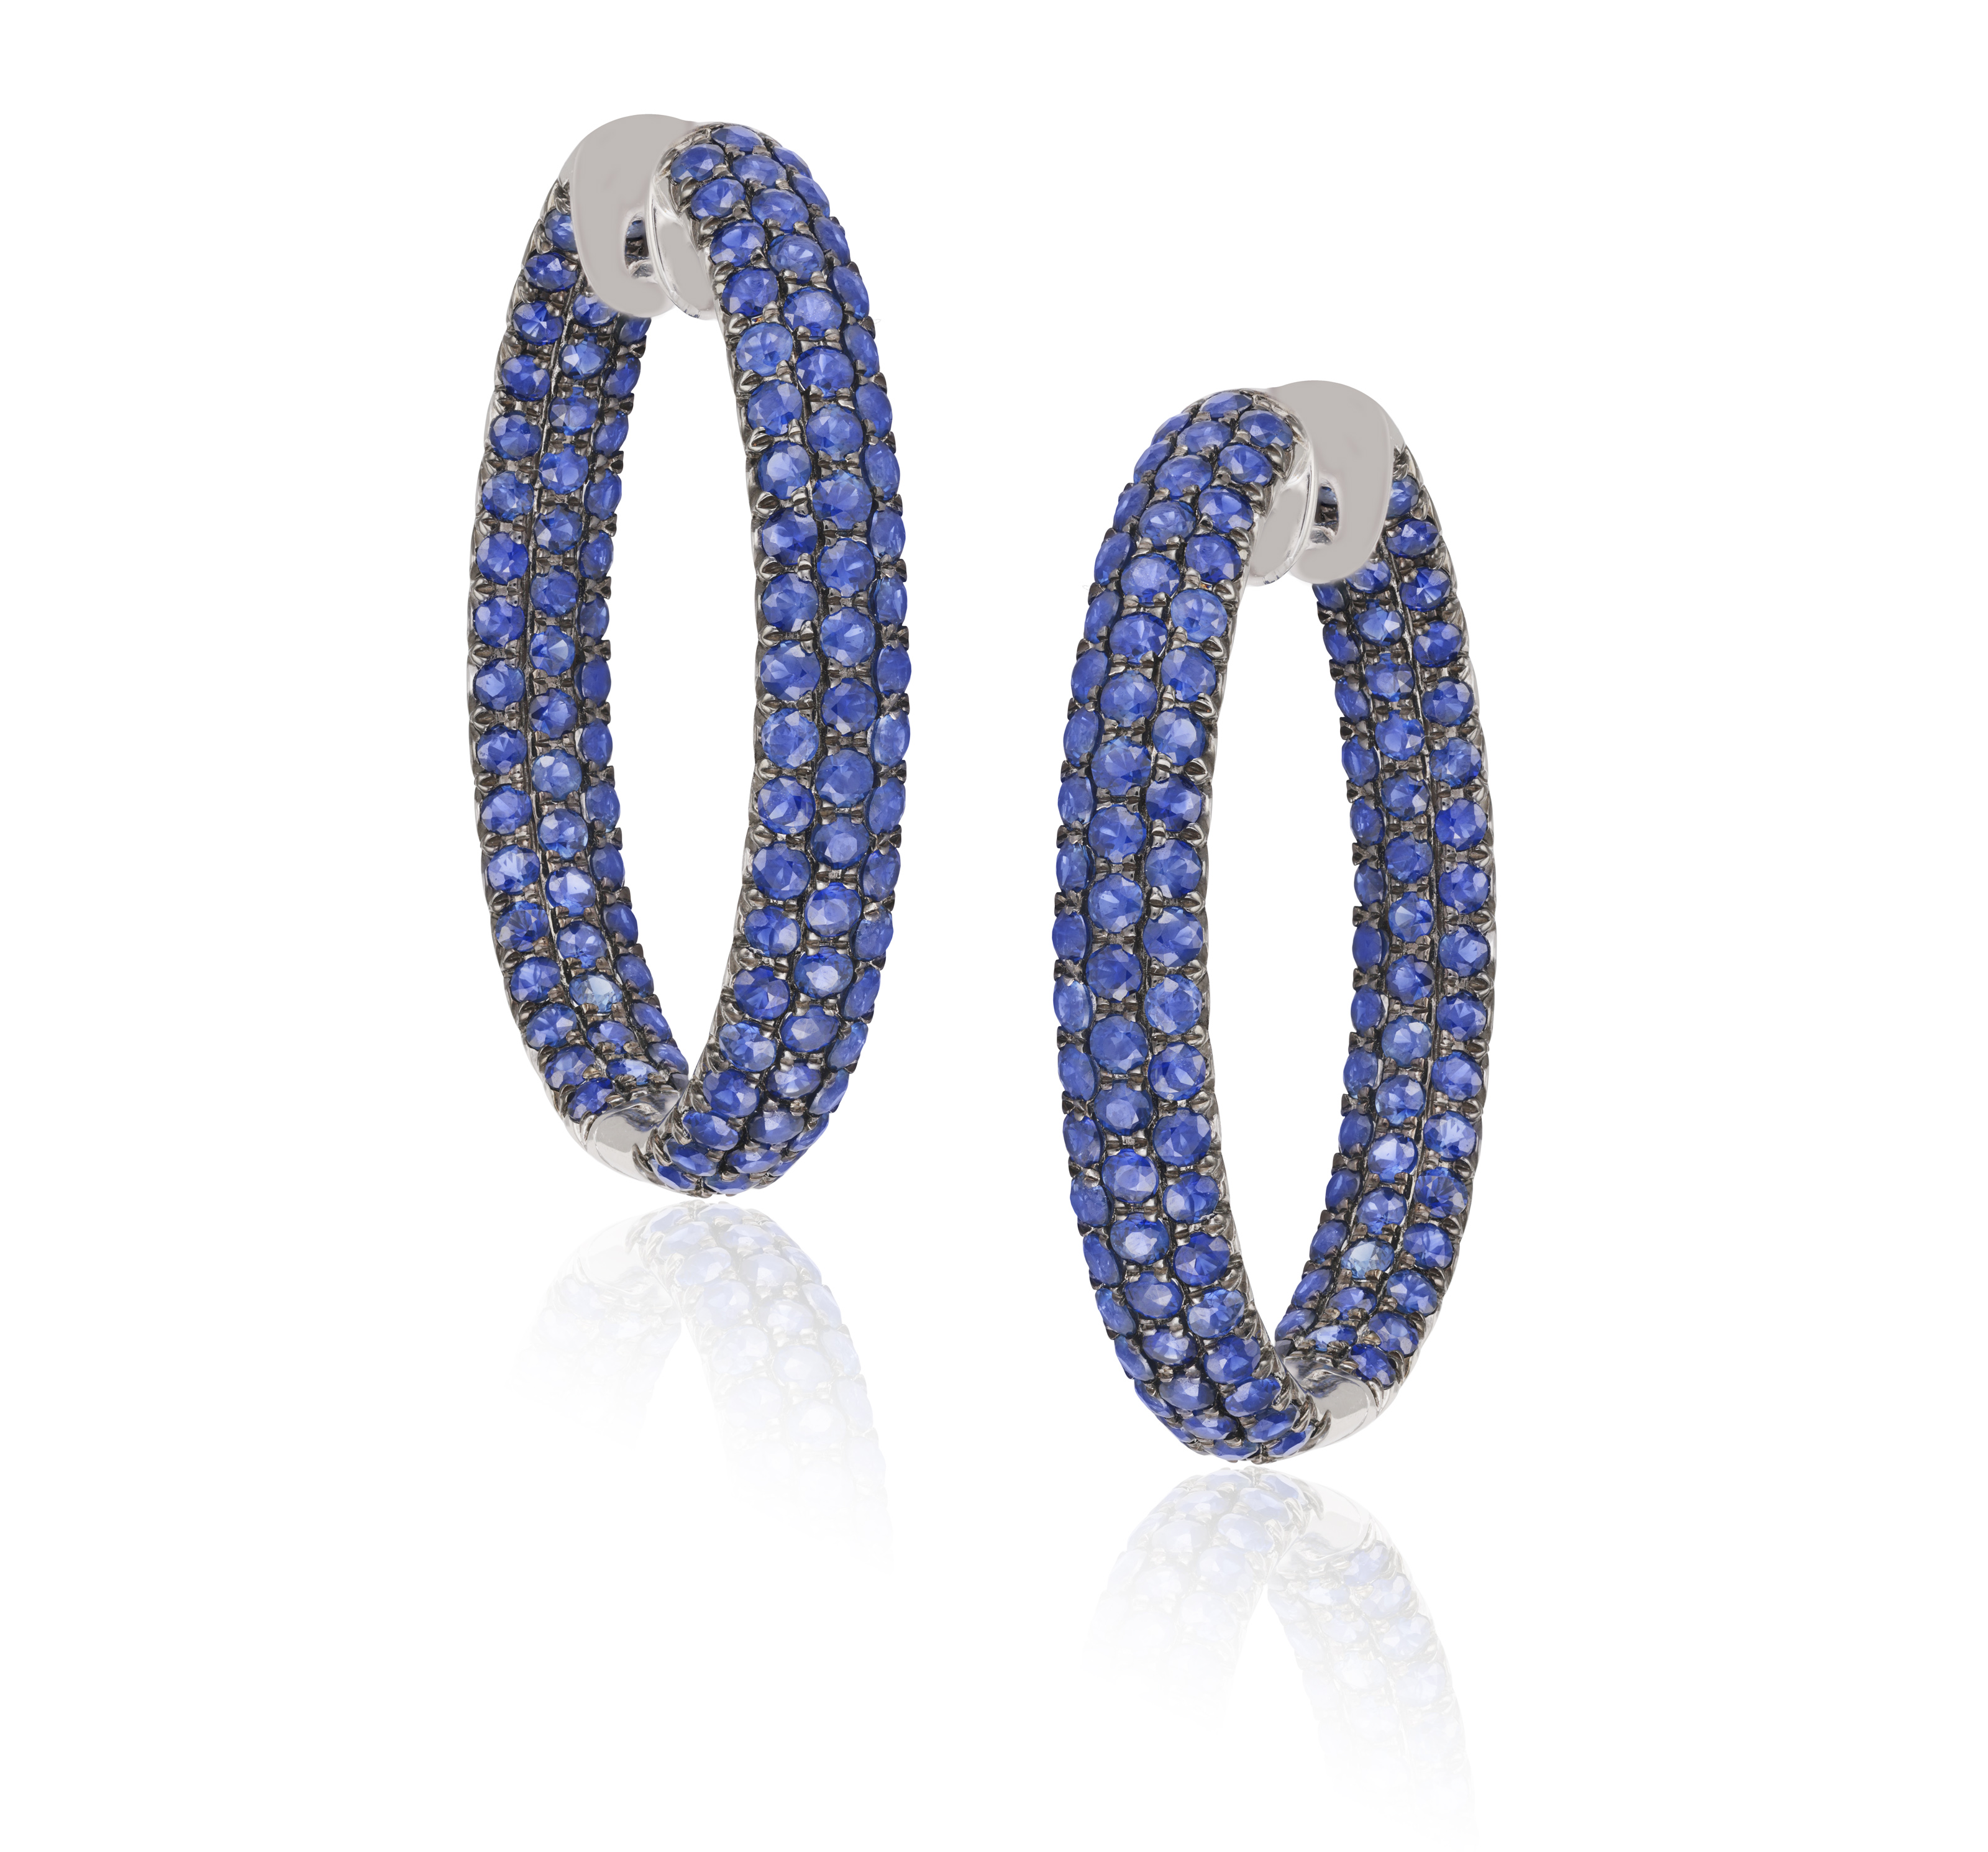 A PAIR OF SAPPHIRE HOOP EARRINGS Each pavé-set with circular-cut sapphires, mounted in 18K gold,